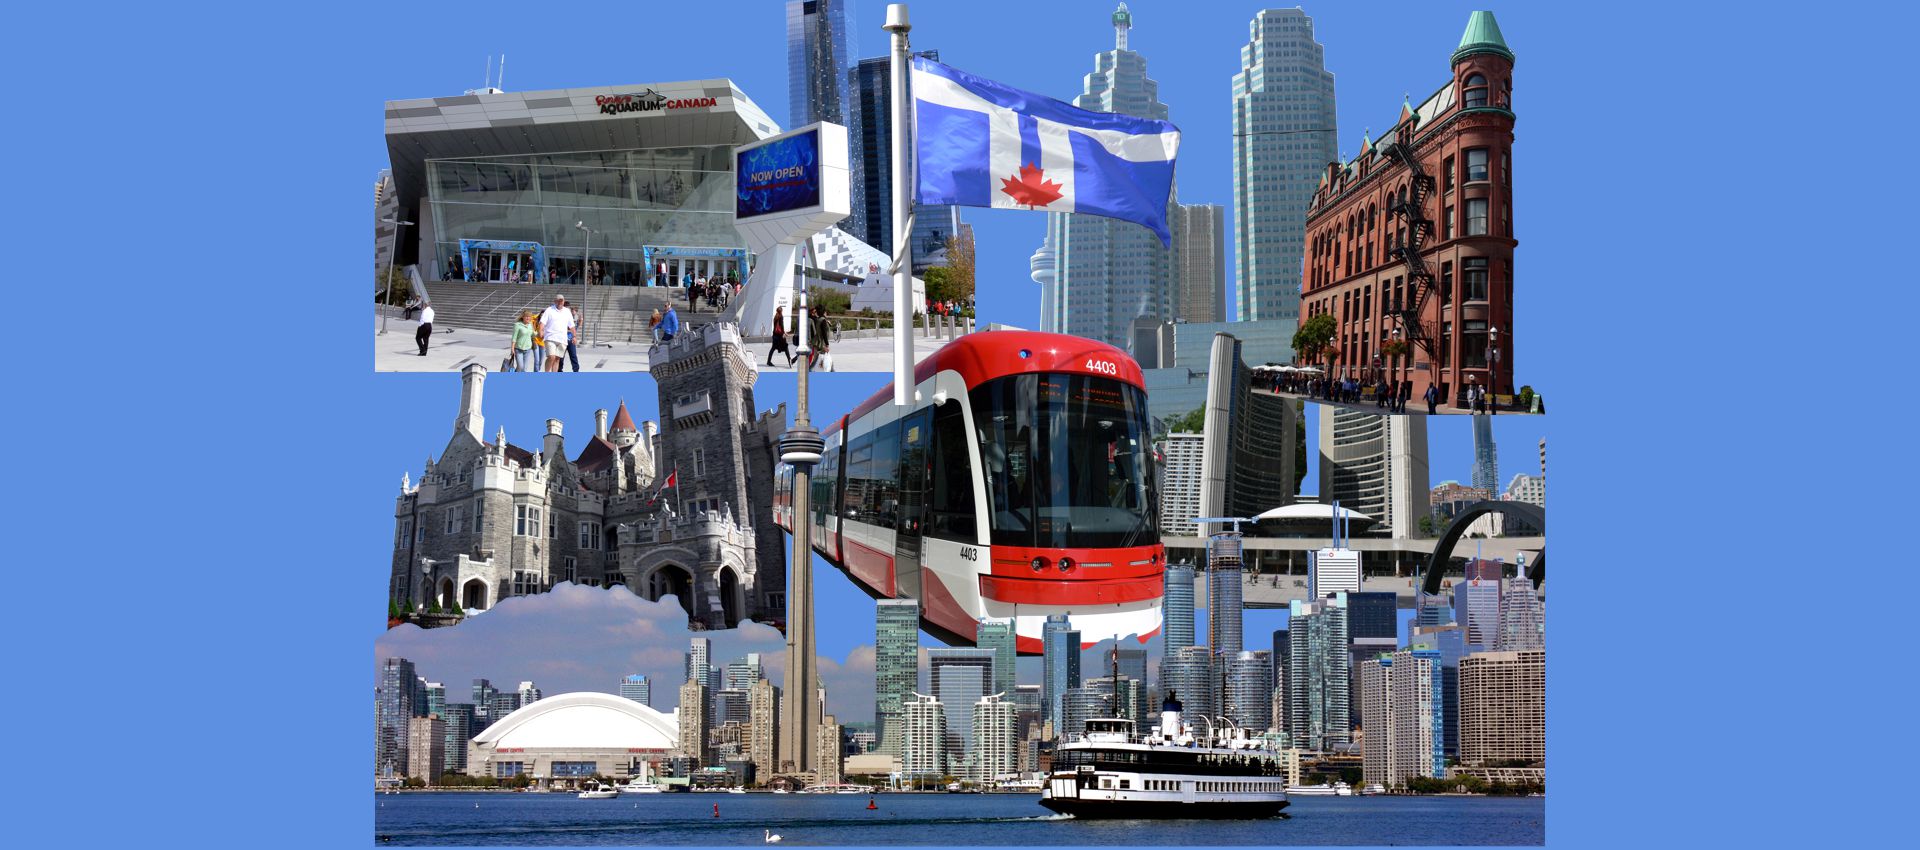 Collage of Most Memorable Places in Toronto